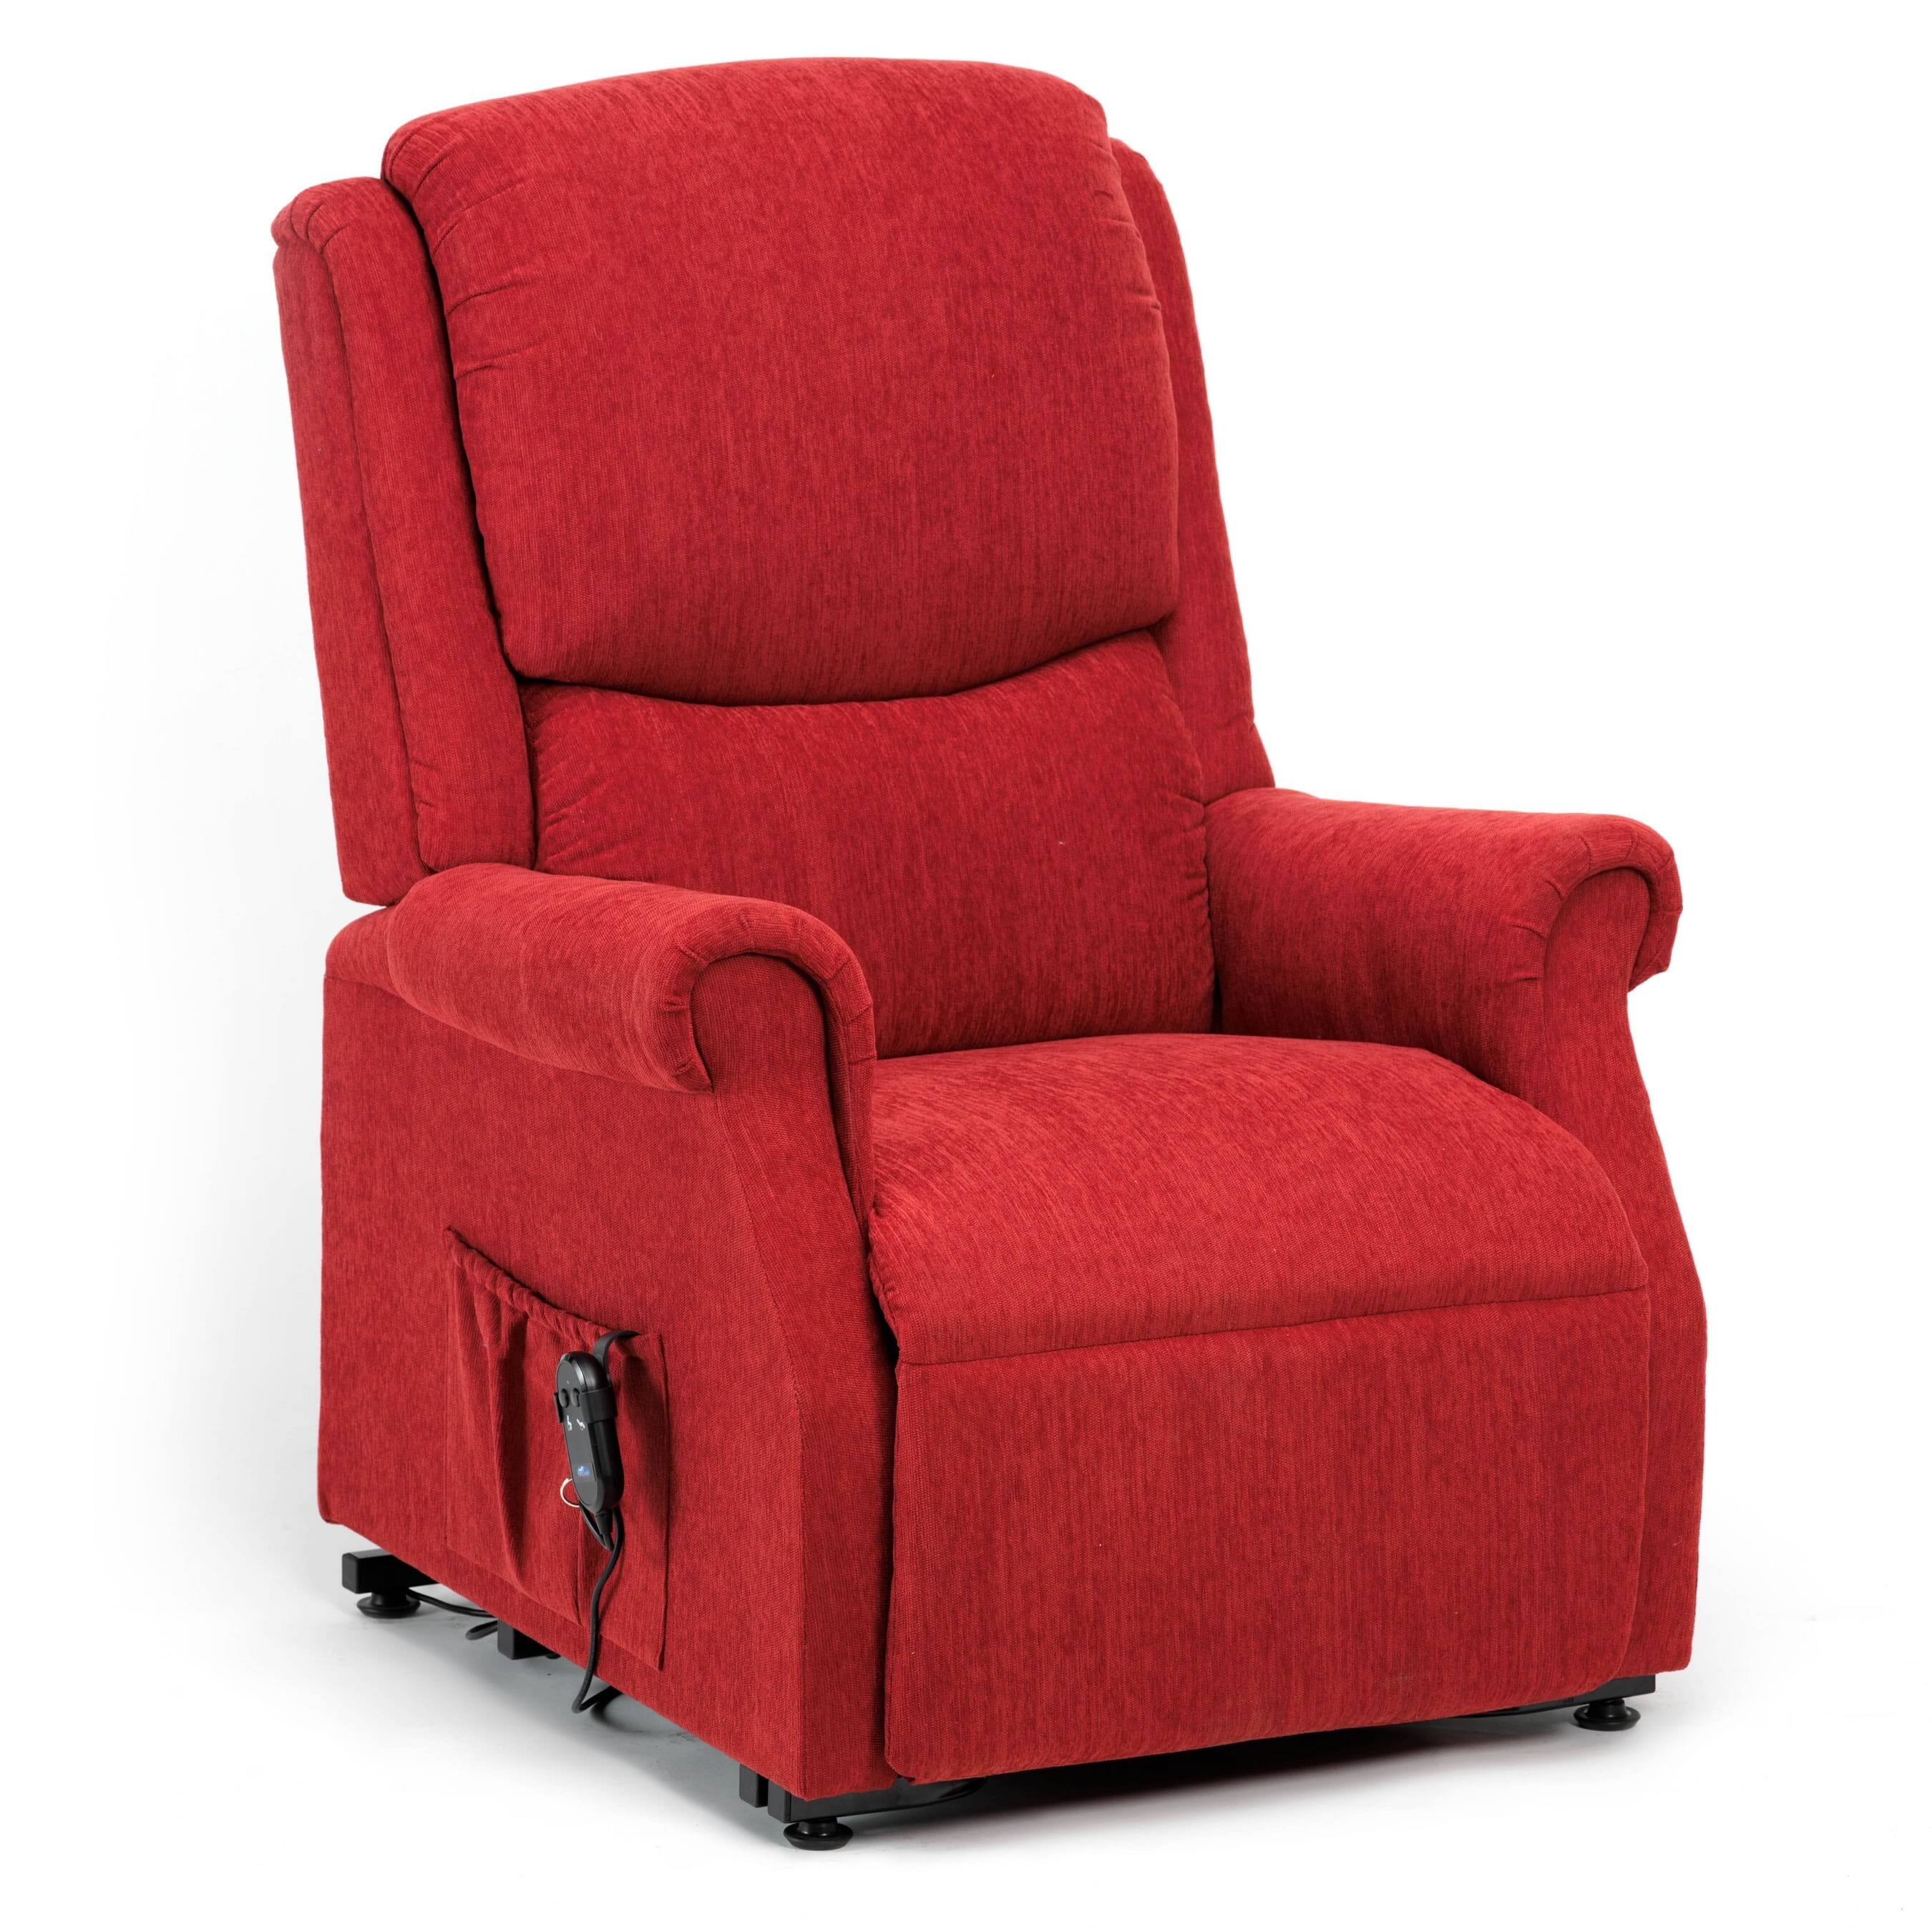 View Indiana Rise and Recline Chair Standard Berry information